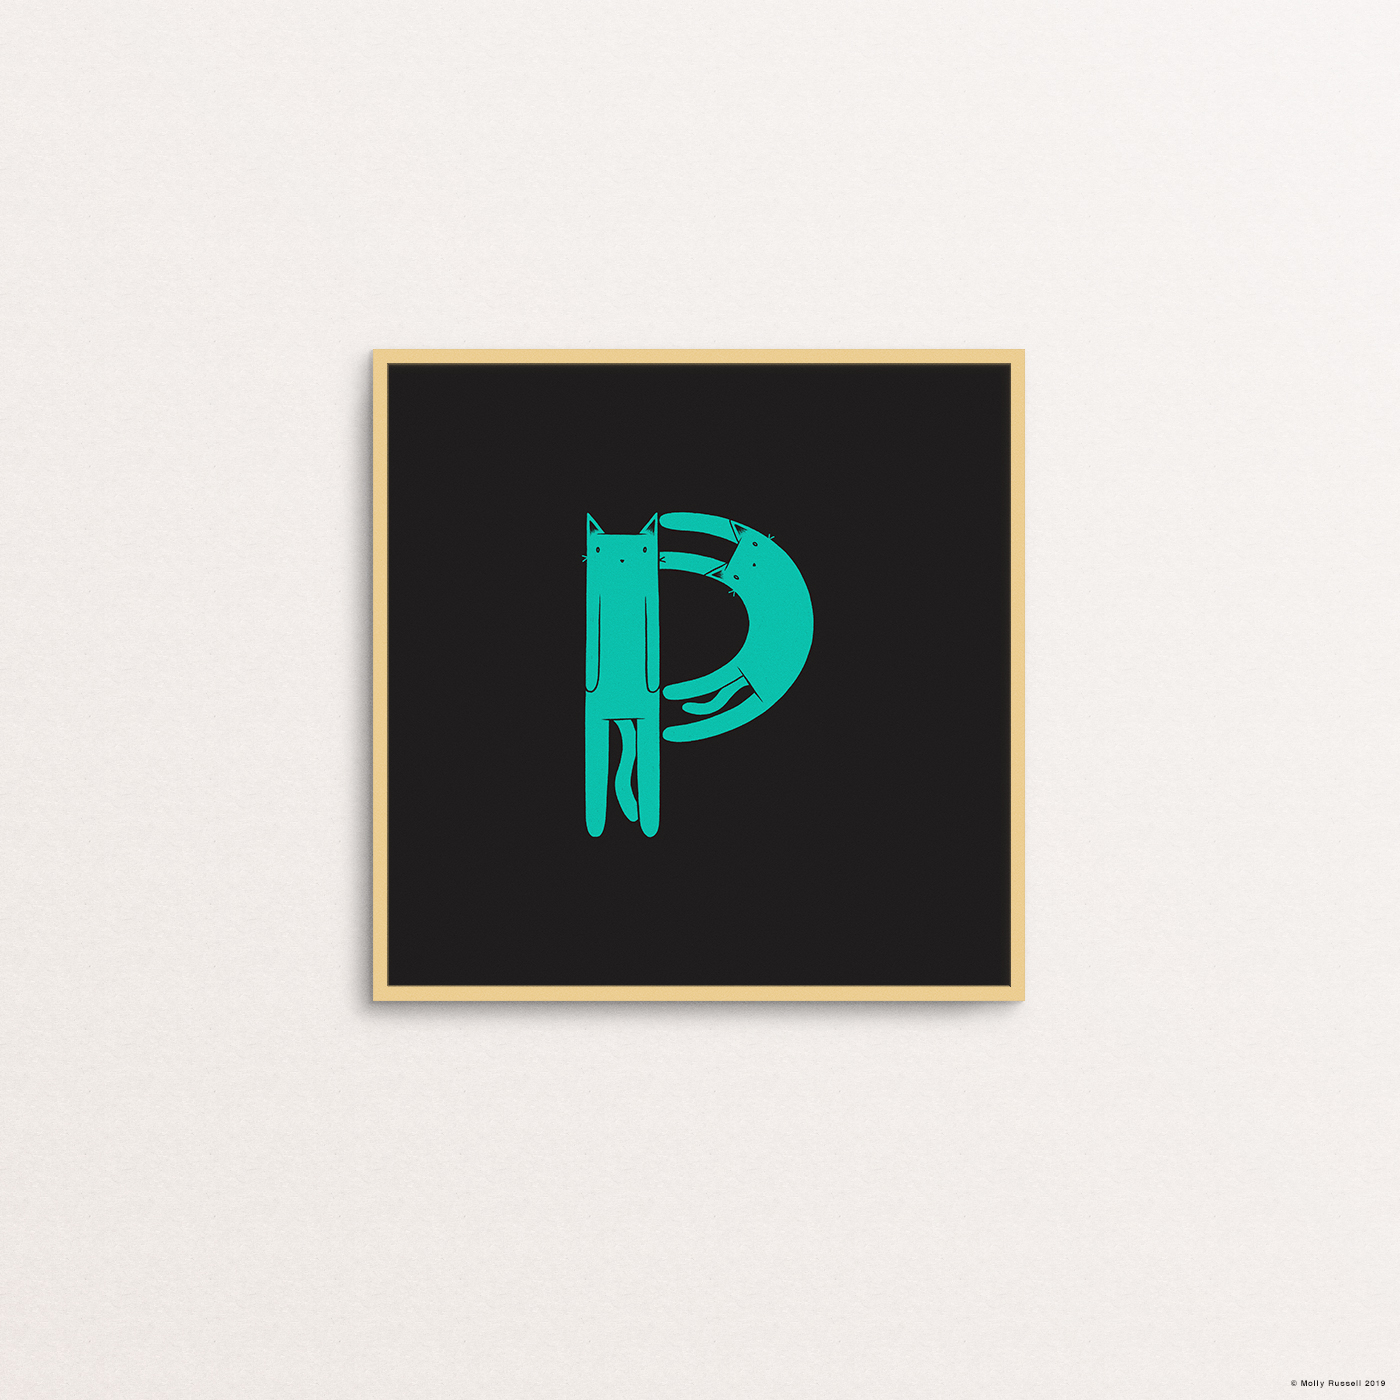 P is for Penelope.